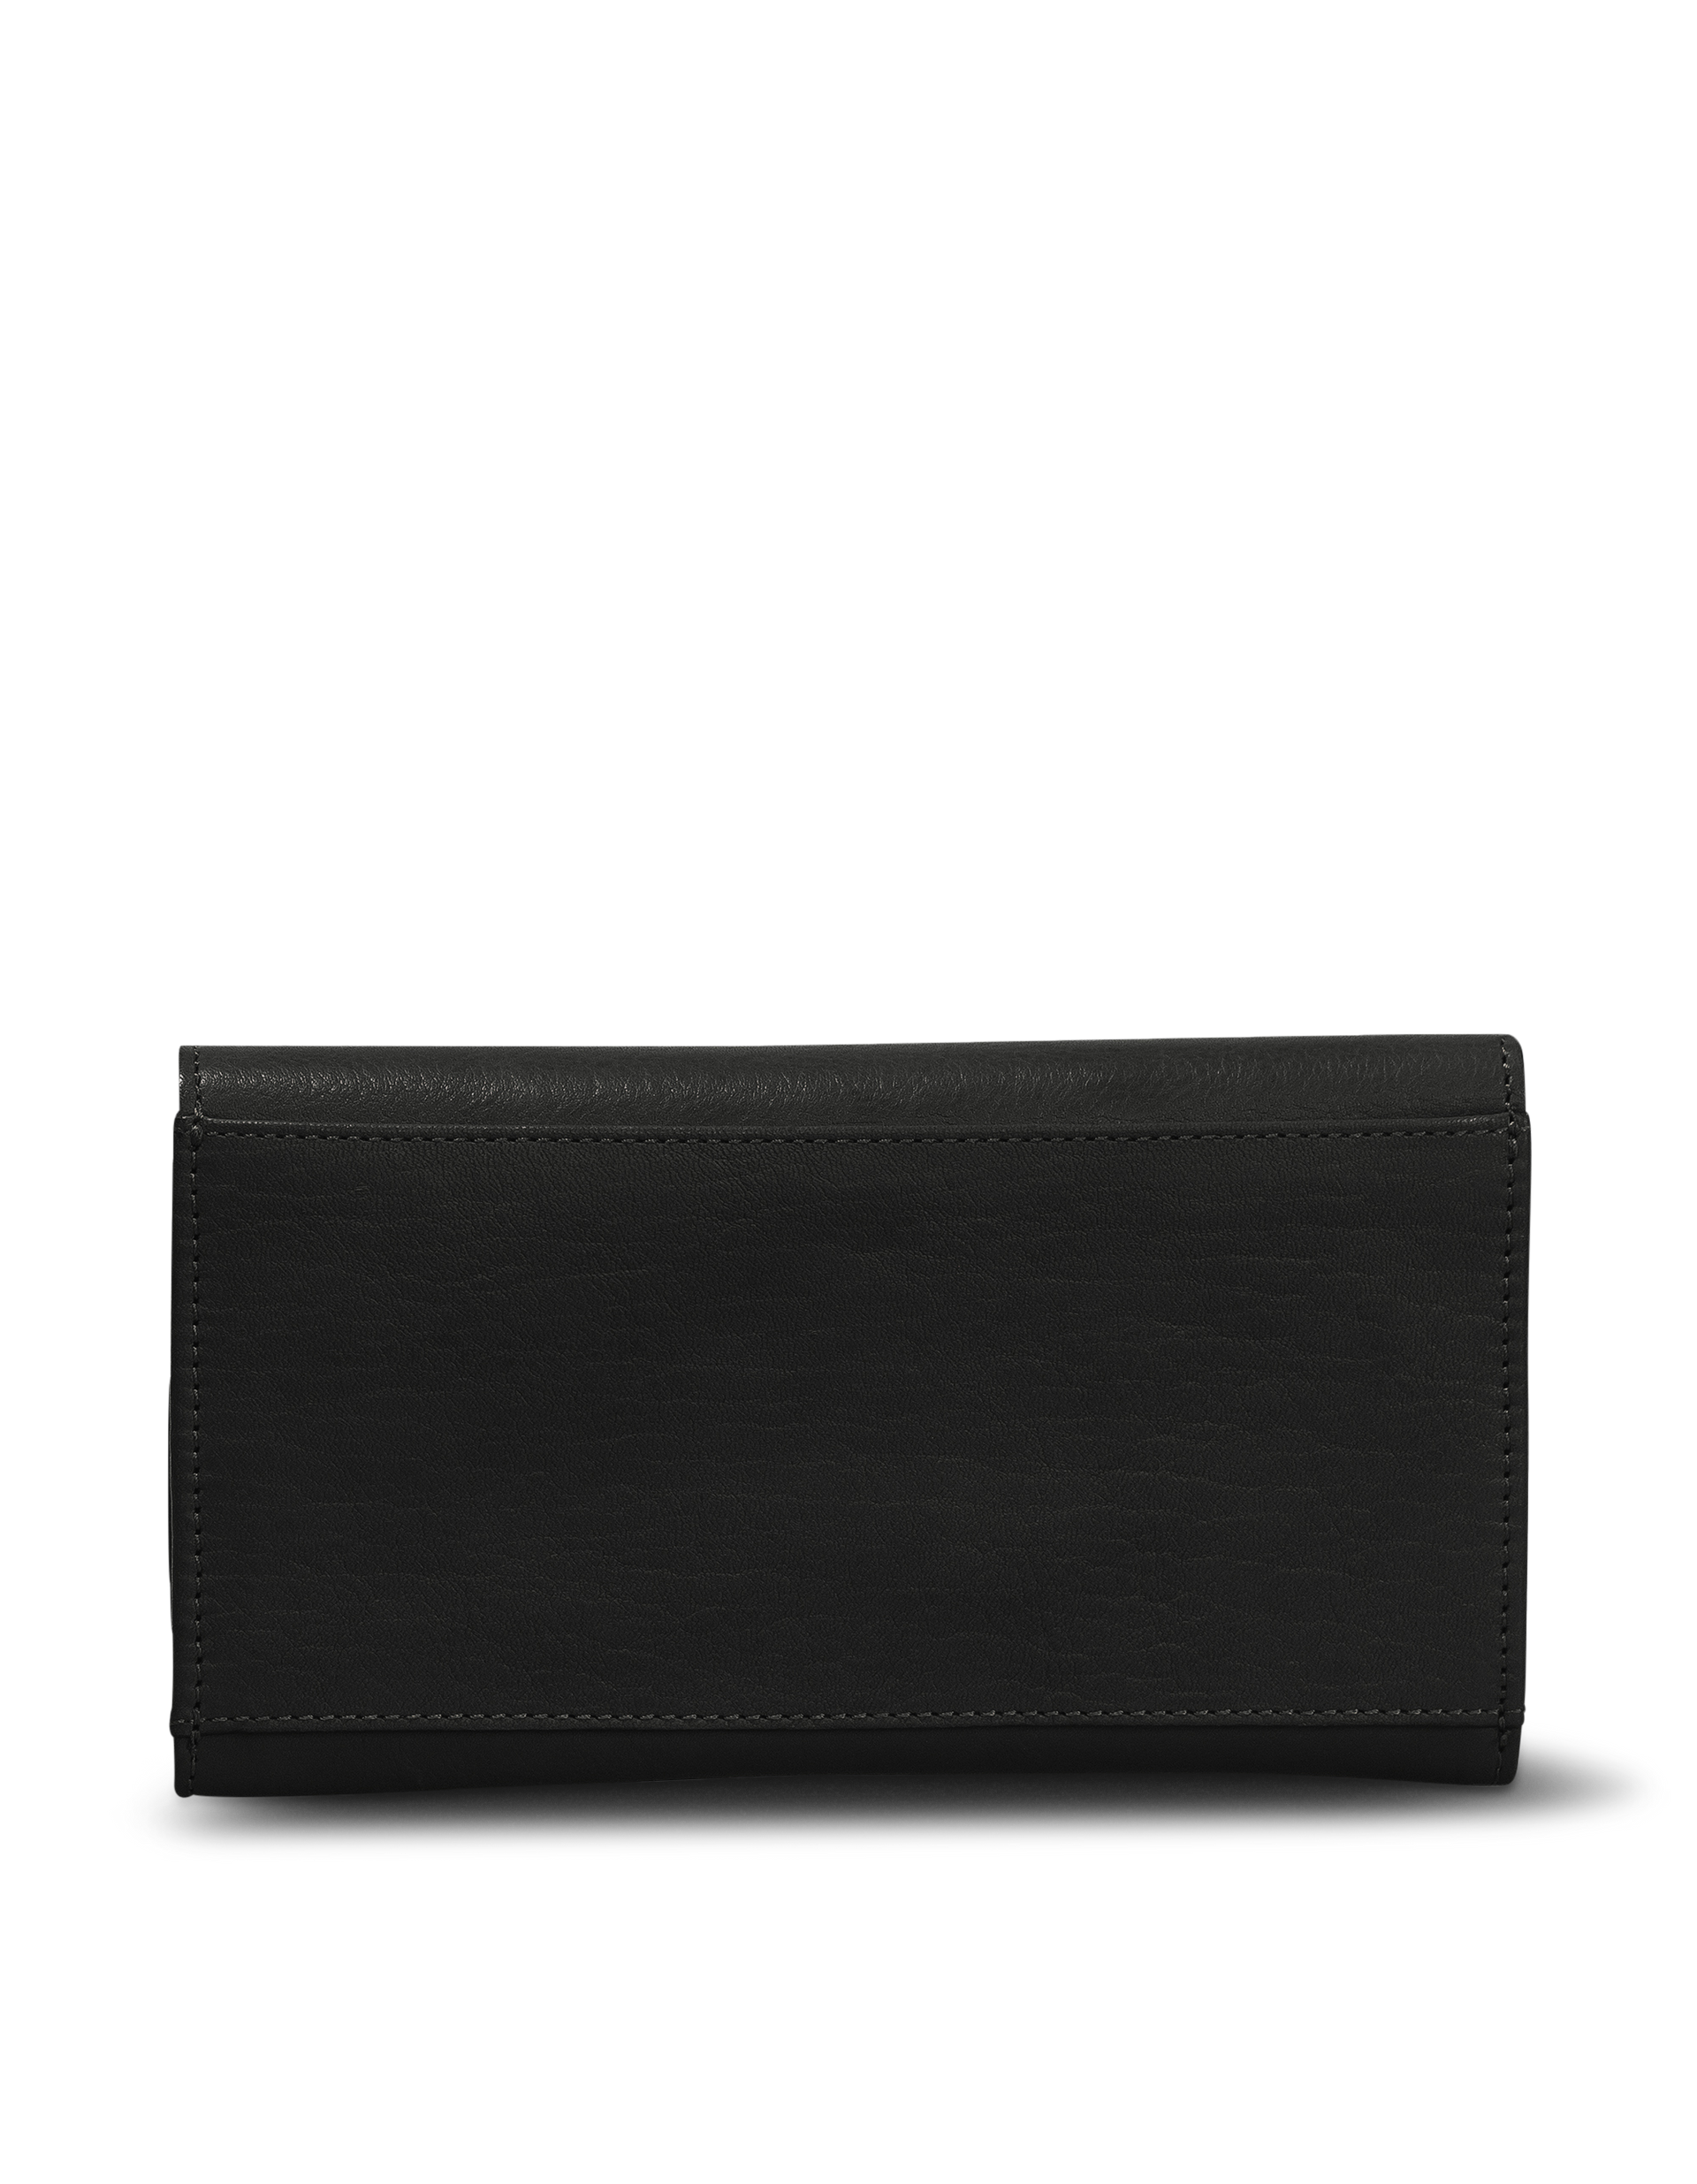 Pixie Pouch Black Soft Grain Leather. Rectangular shaped fold over wallet. Back product image.